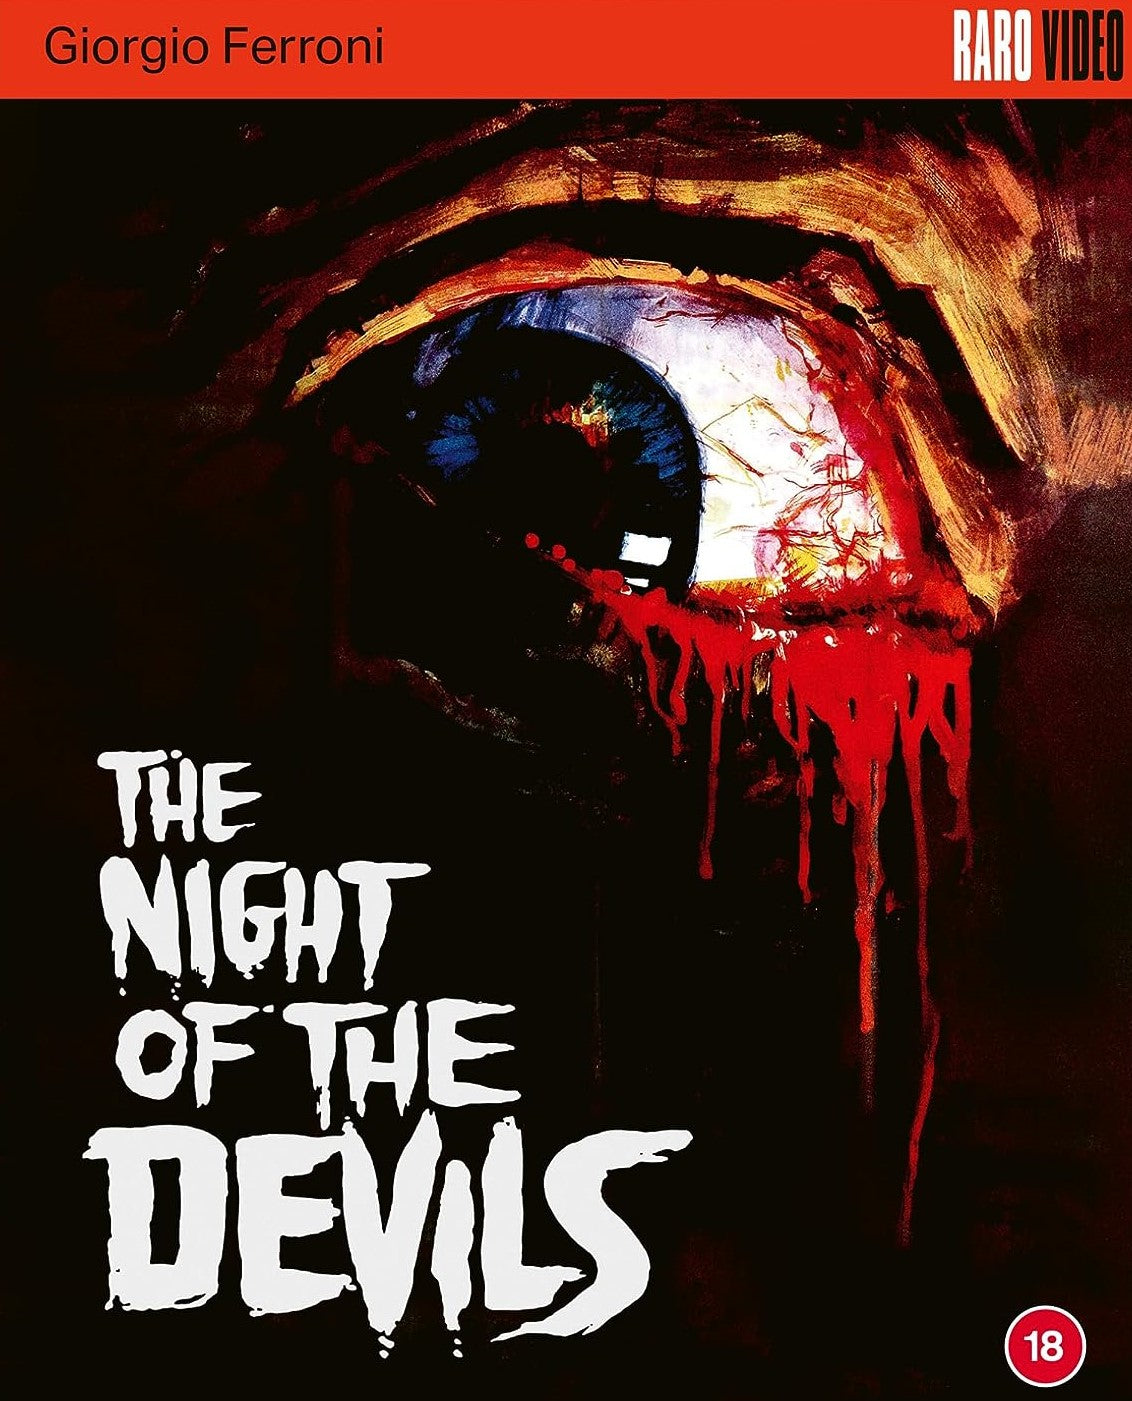 The Night of the Devils Limited Edition Raro Video Blu-Ray [NEW]